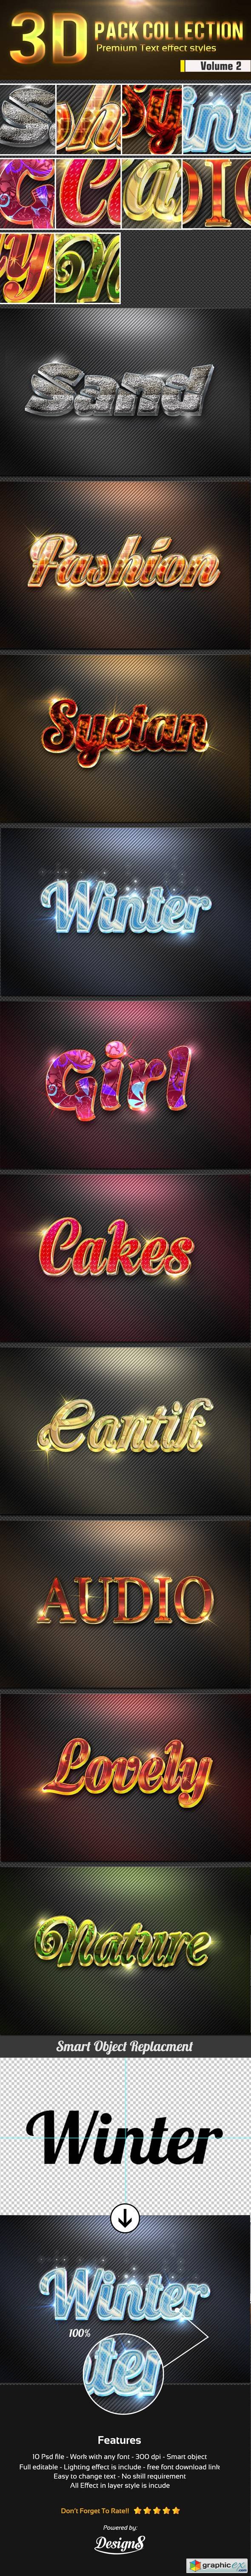 New 3D Photoshop Text Effect Style Vol 2